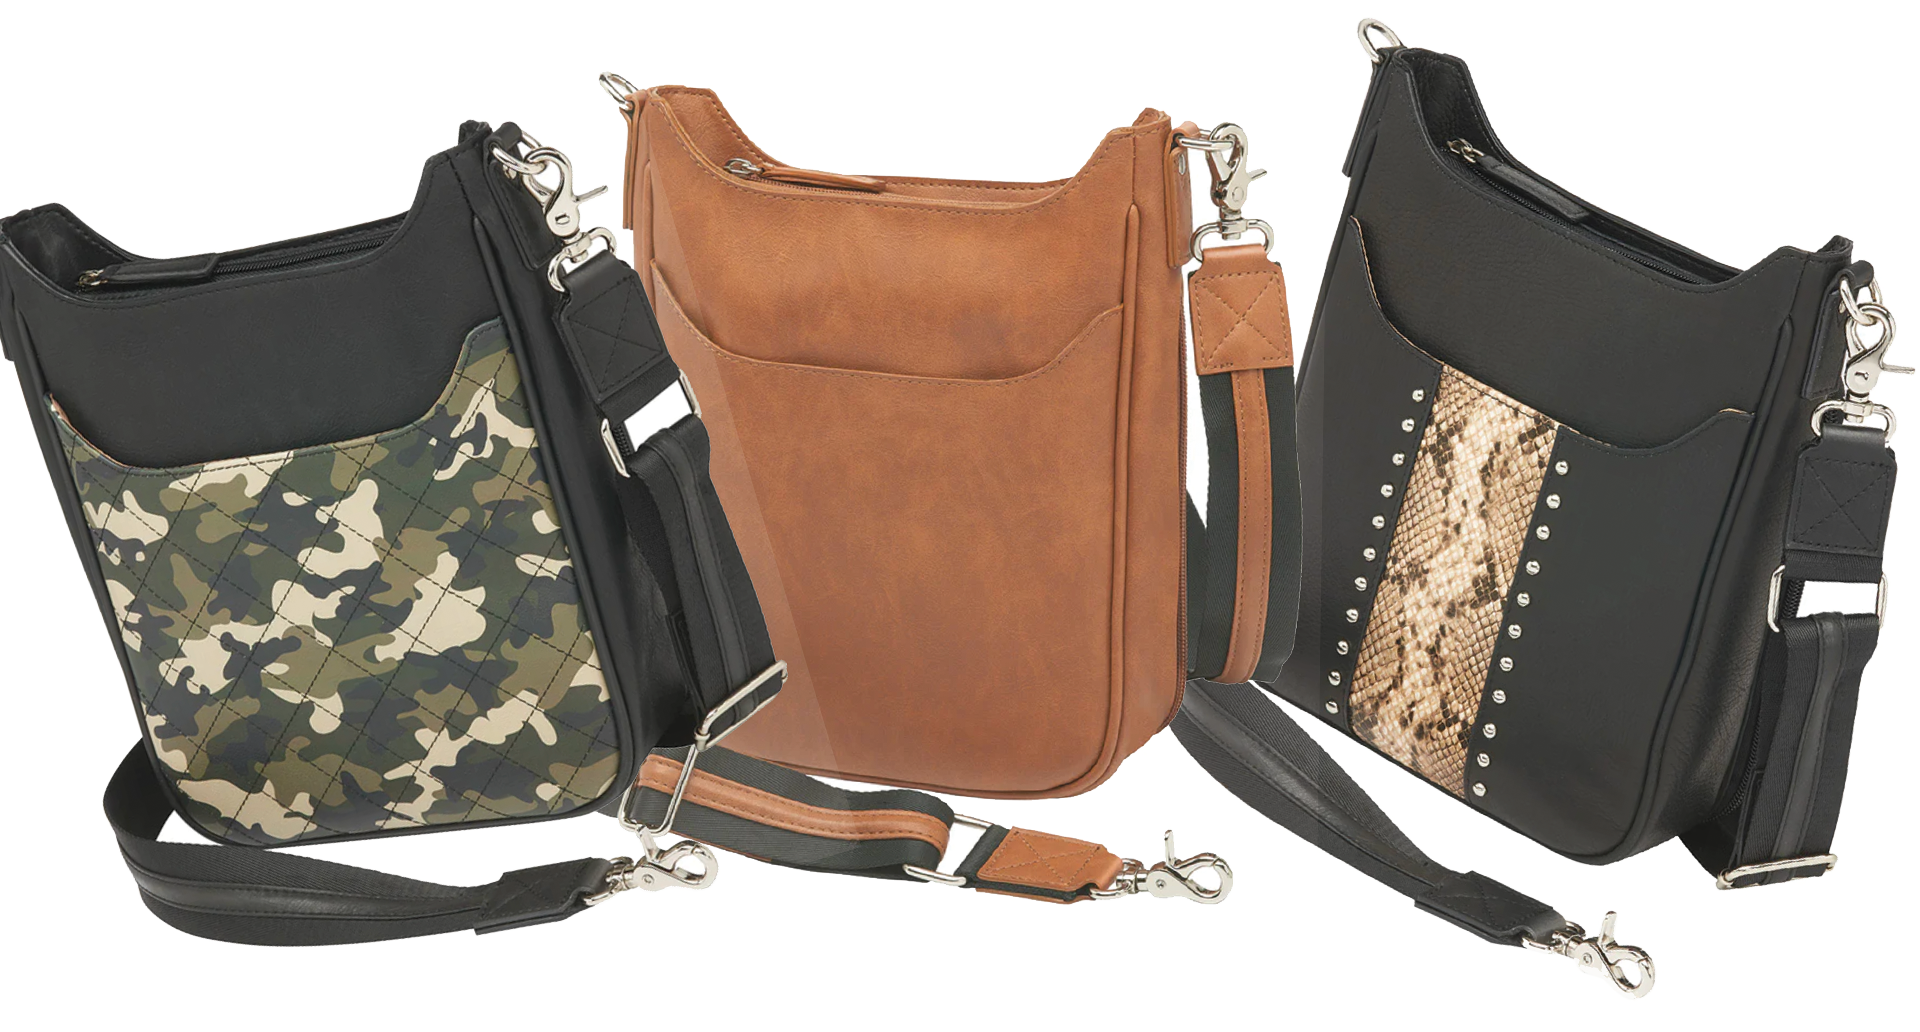 Best Concealed Carry Purses and Inserts for Women | LoveToKnow